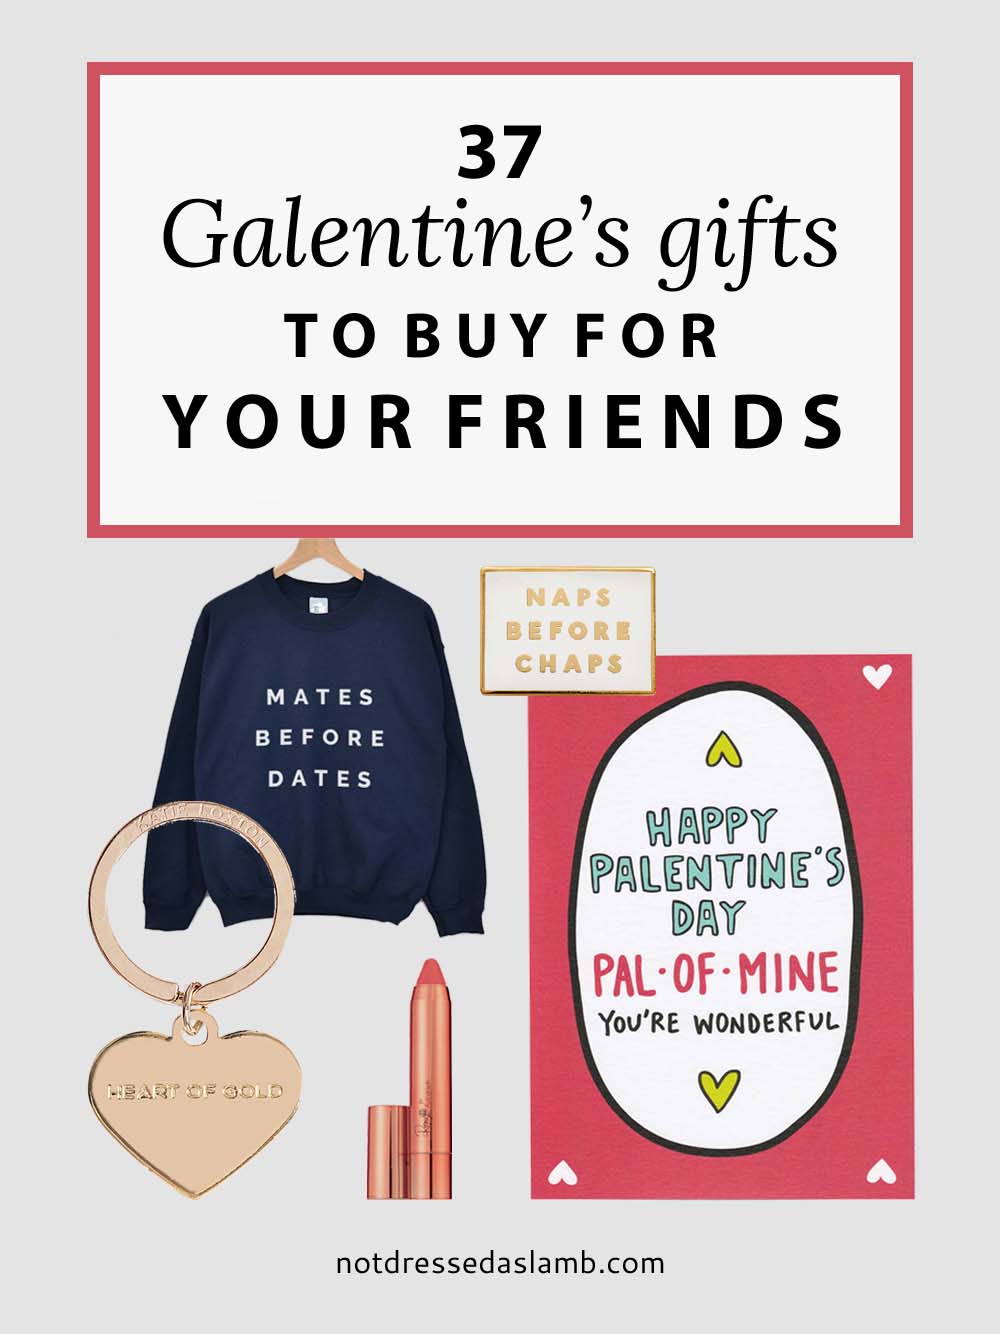 37 Galentine's Day Gifts For Your Friends: treat your best friend to one of these alternative gifts on Valentine's Day. Includes jewellery, homewares, cards, books and even things for a foodie.